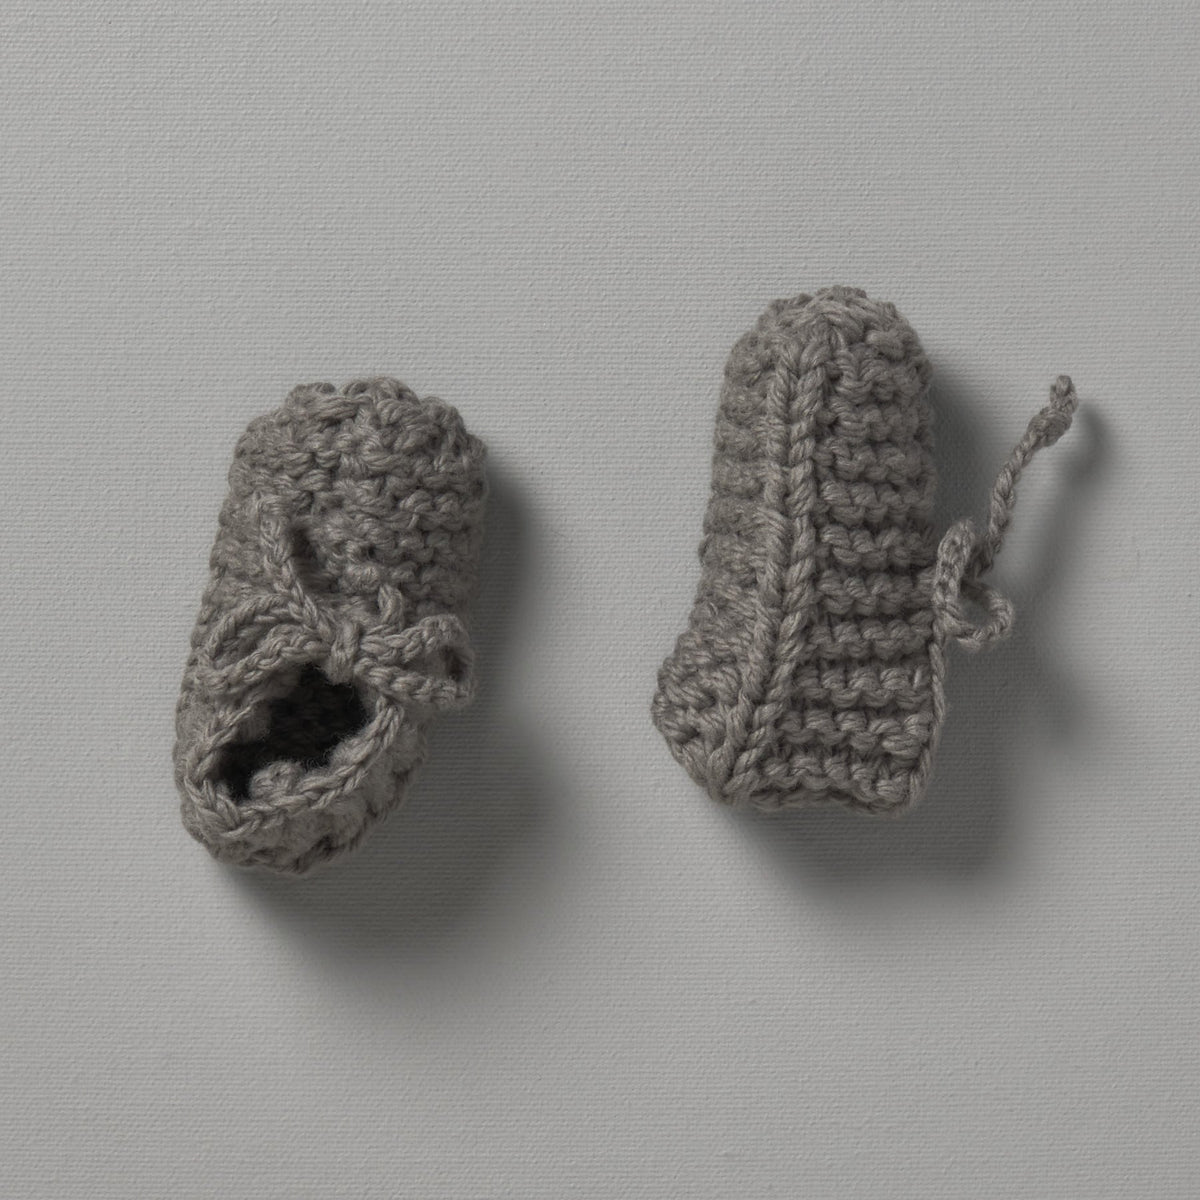 Two Weebits Hand Knitted Chunky Mushroom Booties on a white surface.